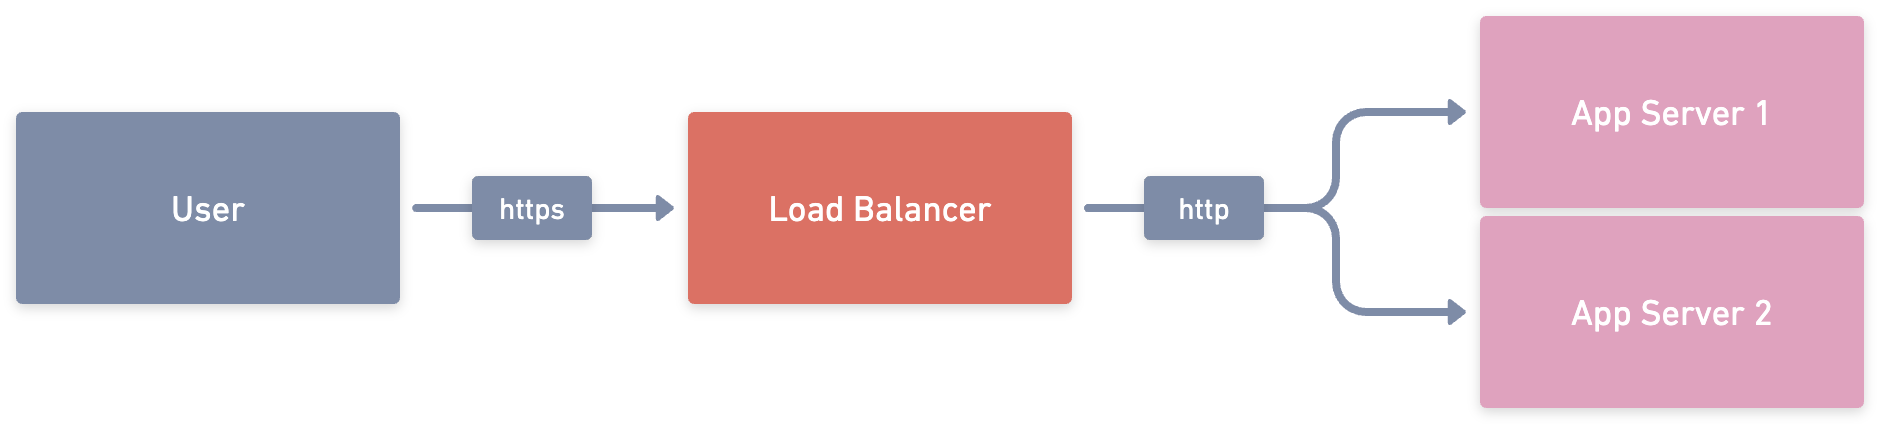 Diagram of databse architecture behind a load balancer